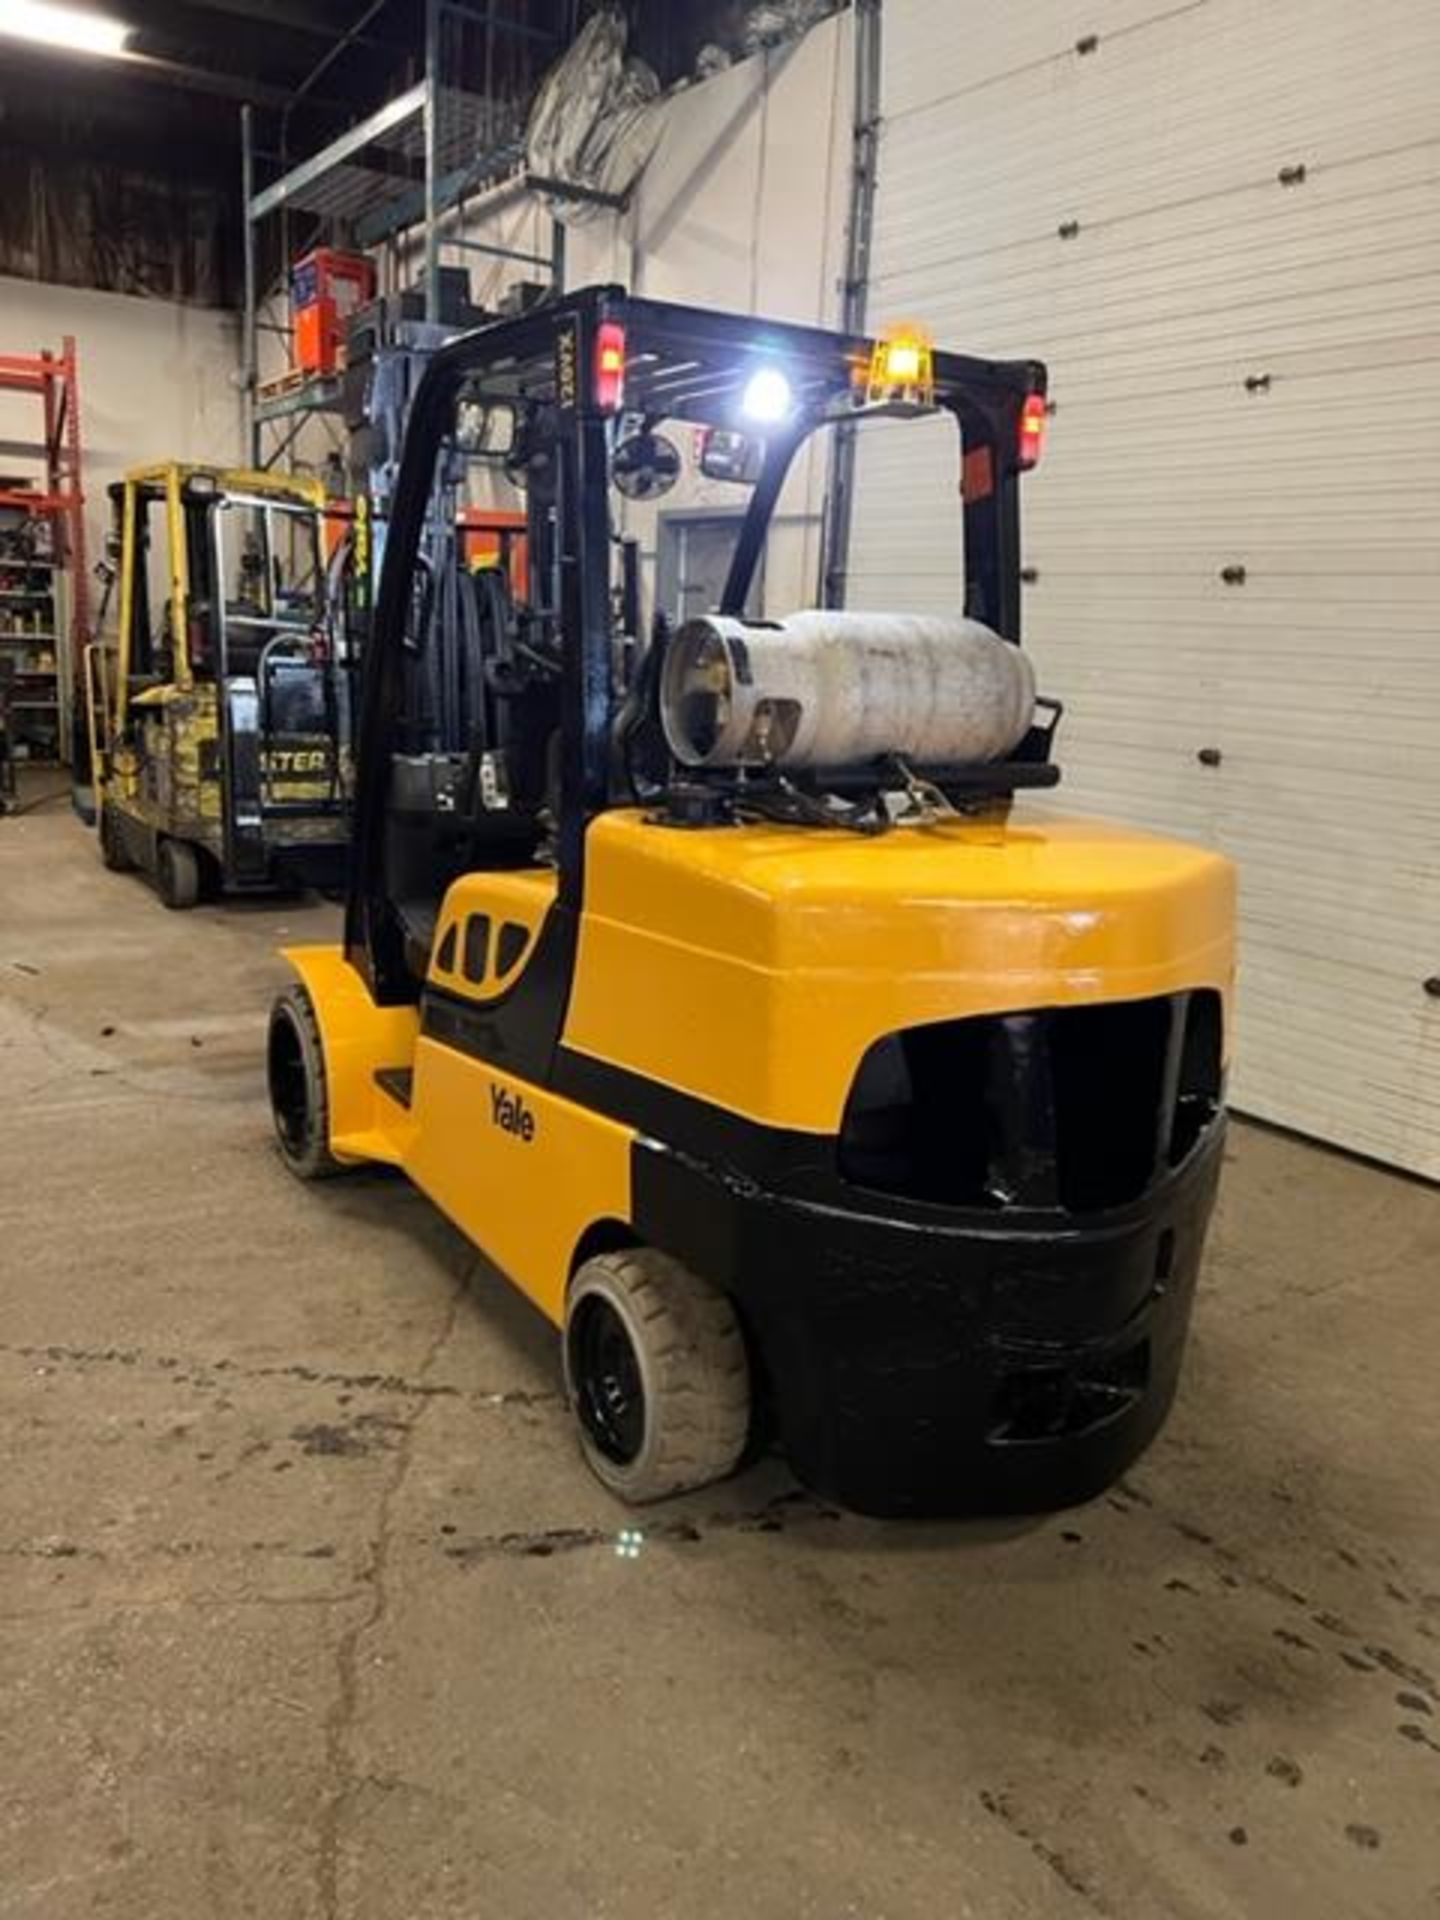 FREE CUSTOMS - NICE 2018 Yale model 120 - 12,000lbs Capacity Forklift LPG (propane) with 60" forks - Image 3 of 3